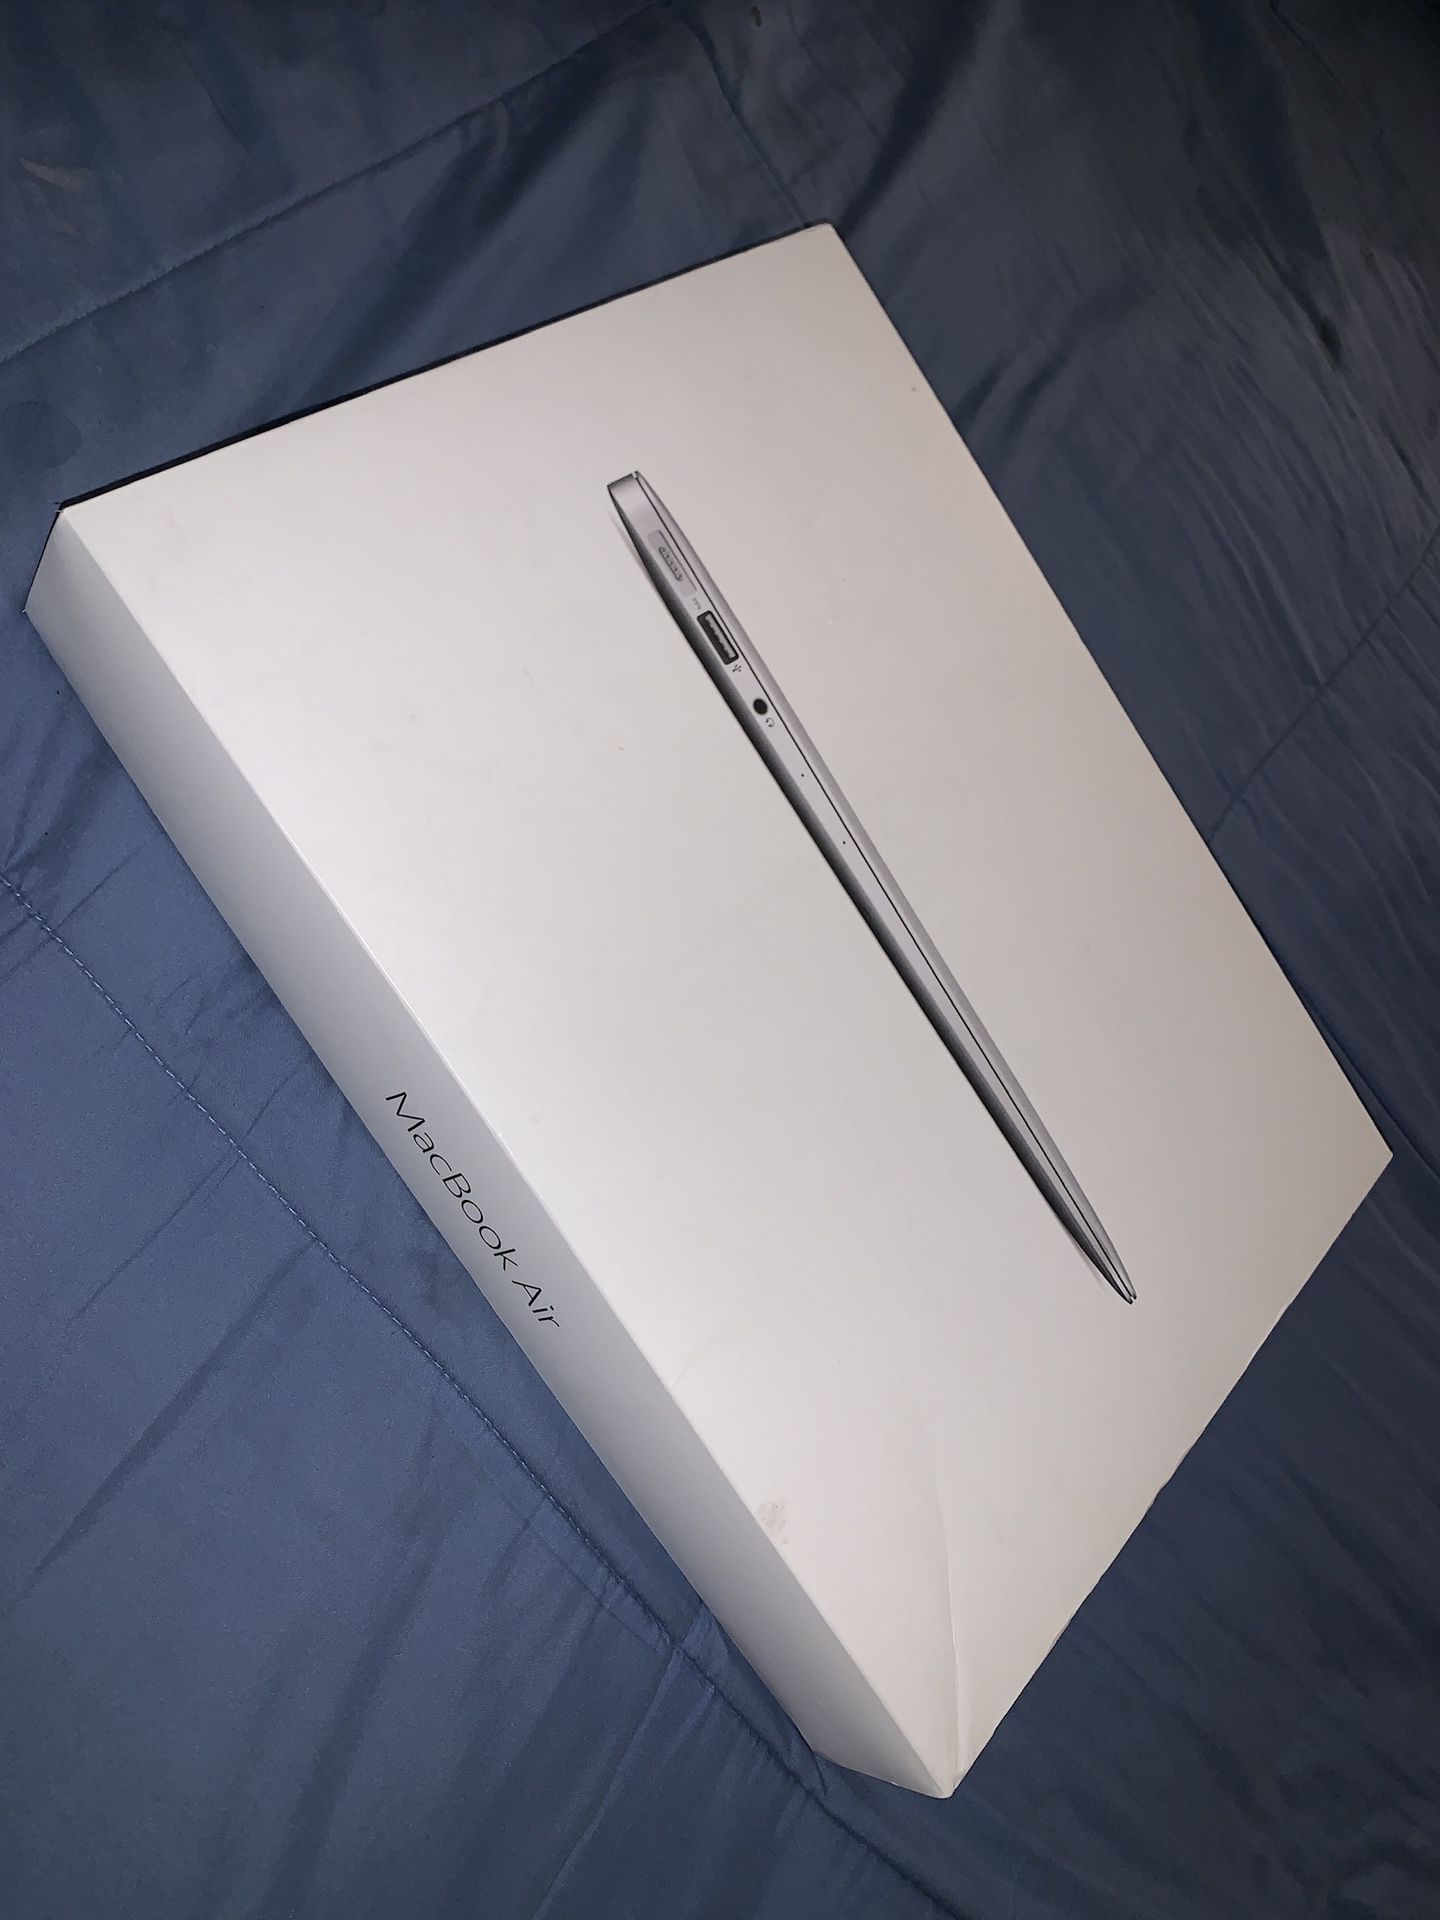 MacBook Air 2017 (for parts) perfect condition